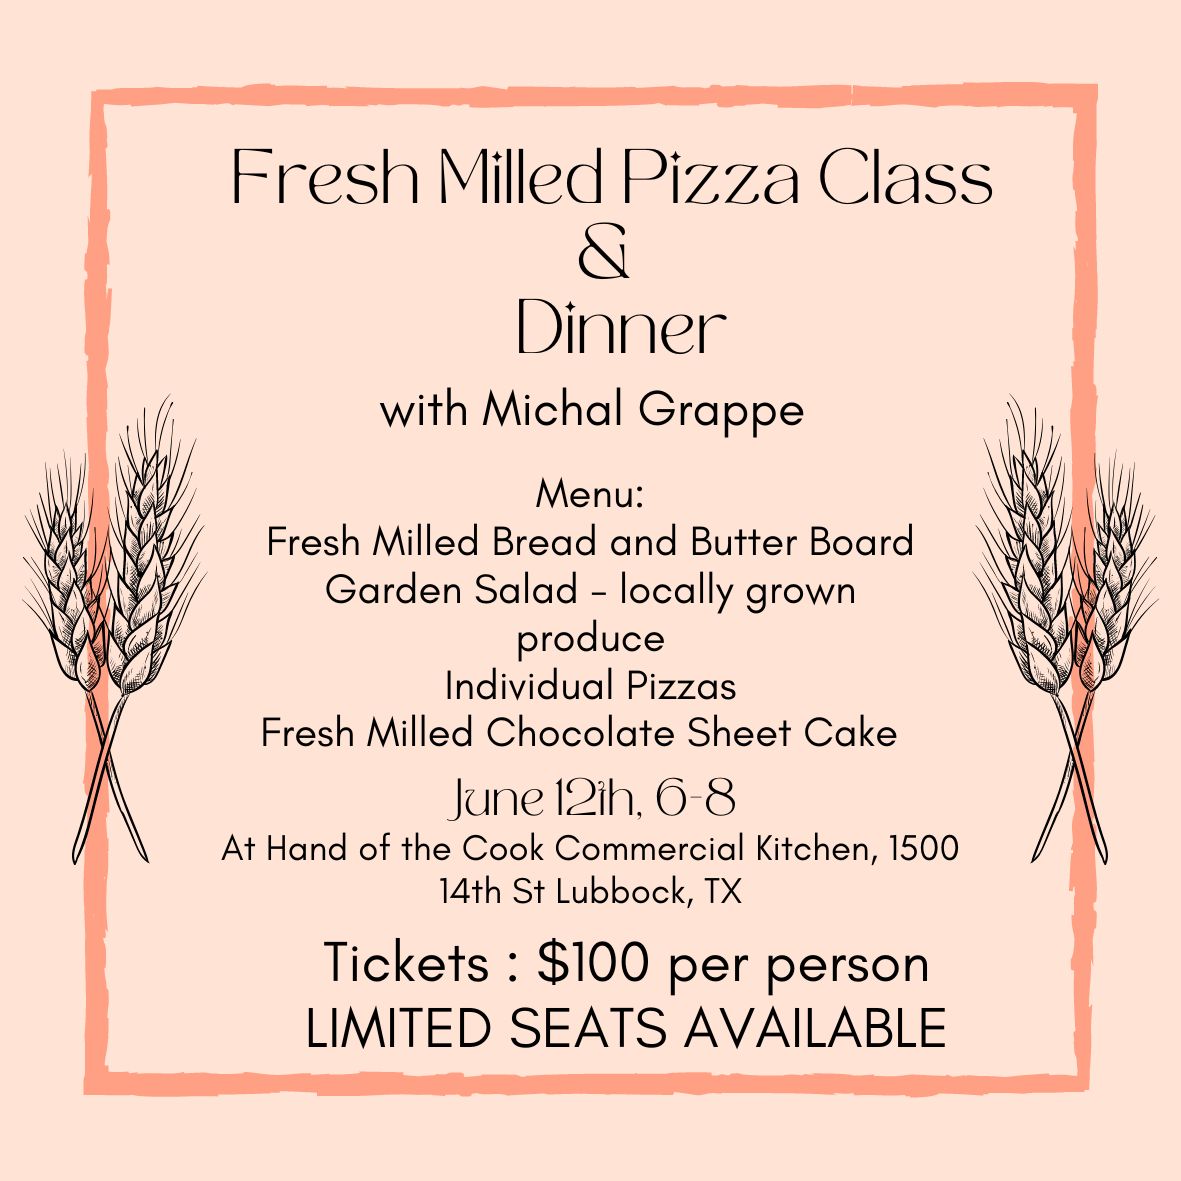 Fresh Milled Pizza Class and Dinner